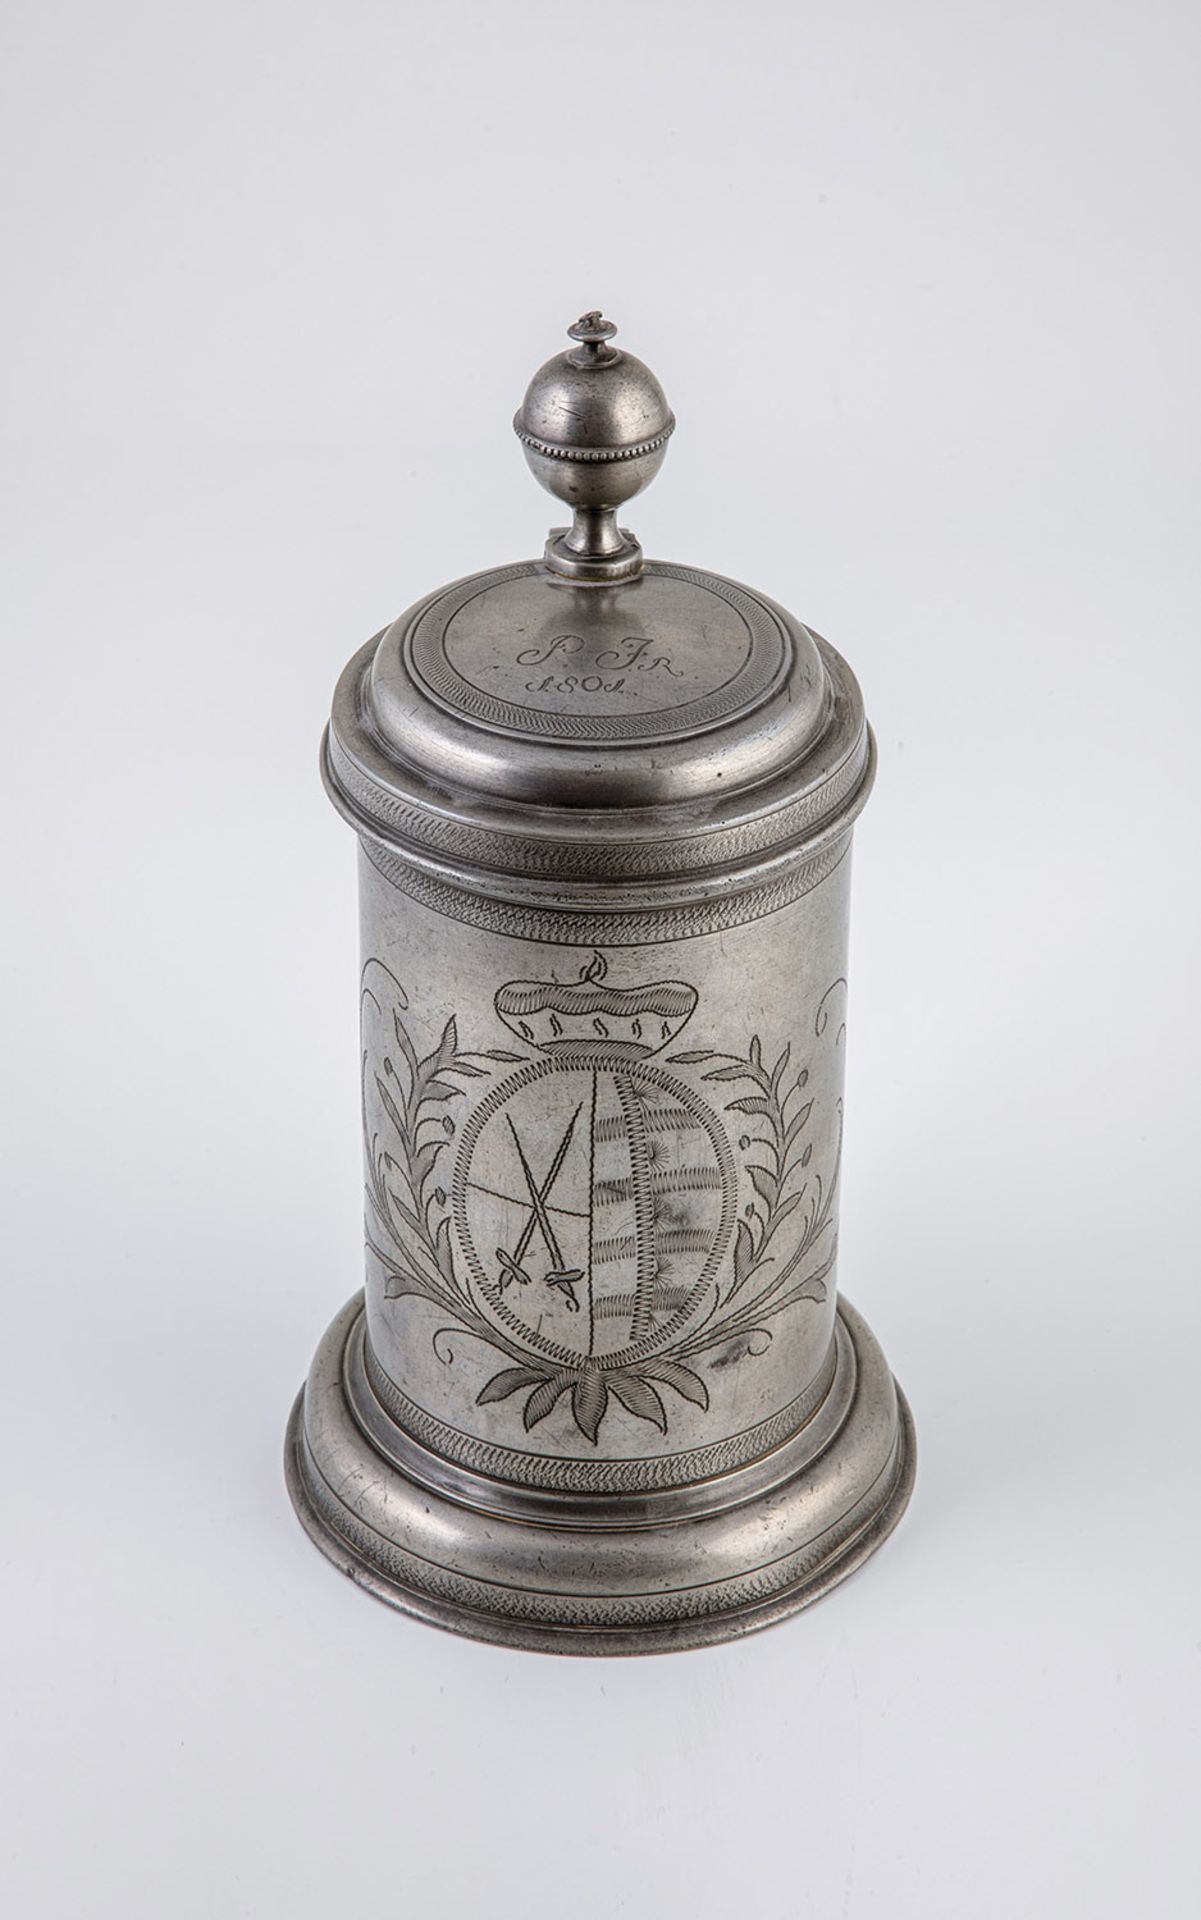 Roller jug with the coat of arms of the Electorate of Saxony